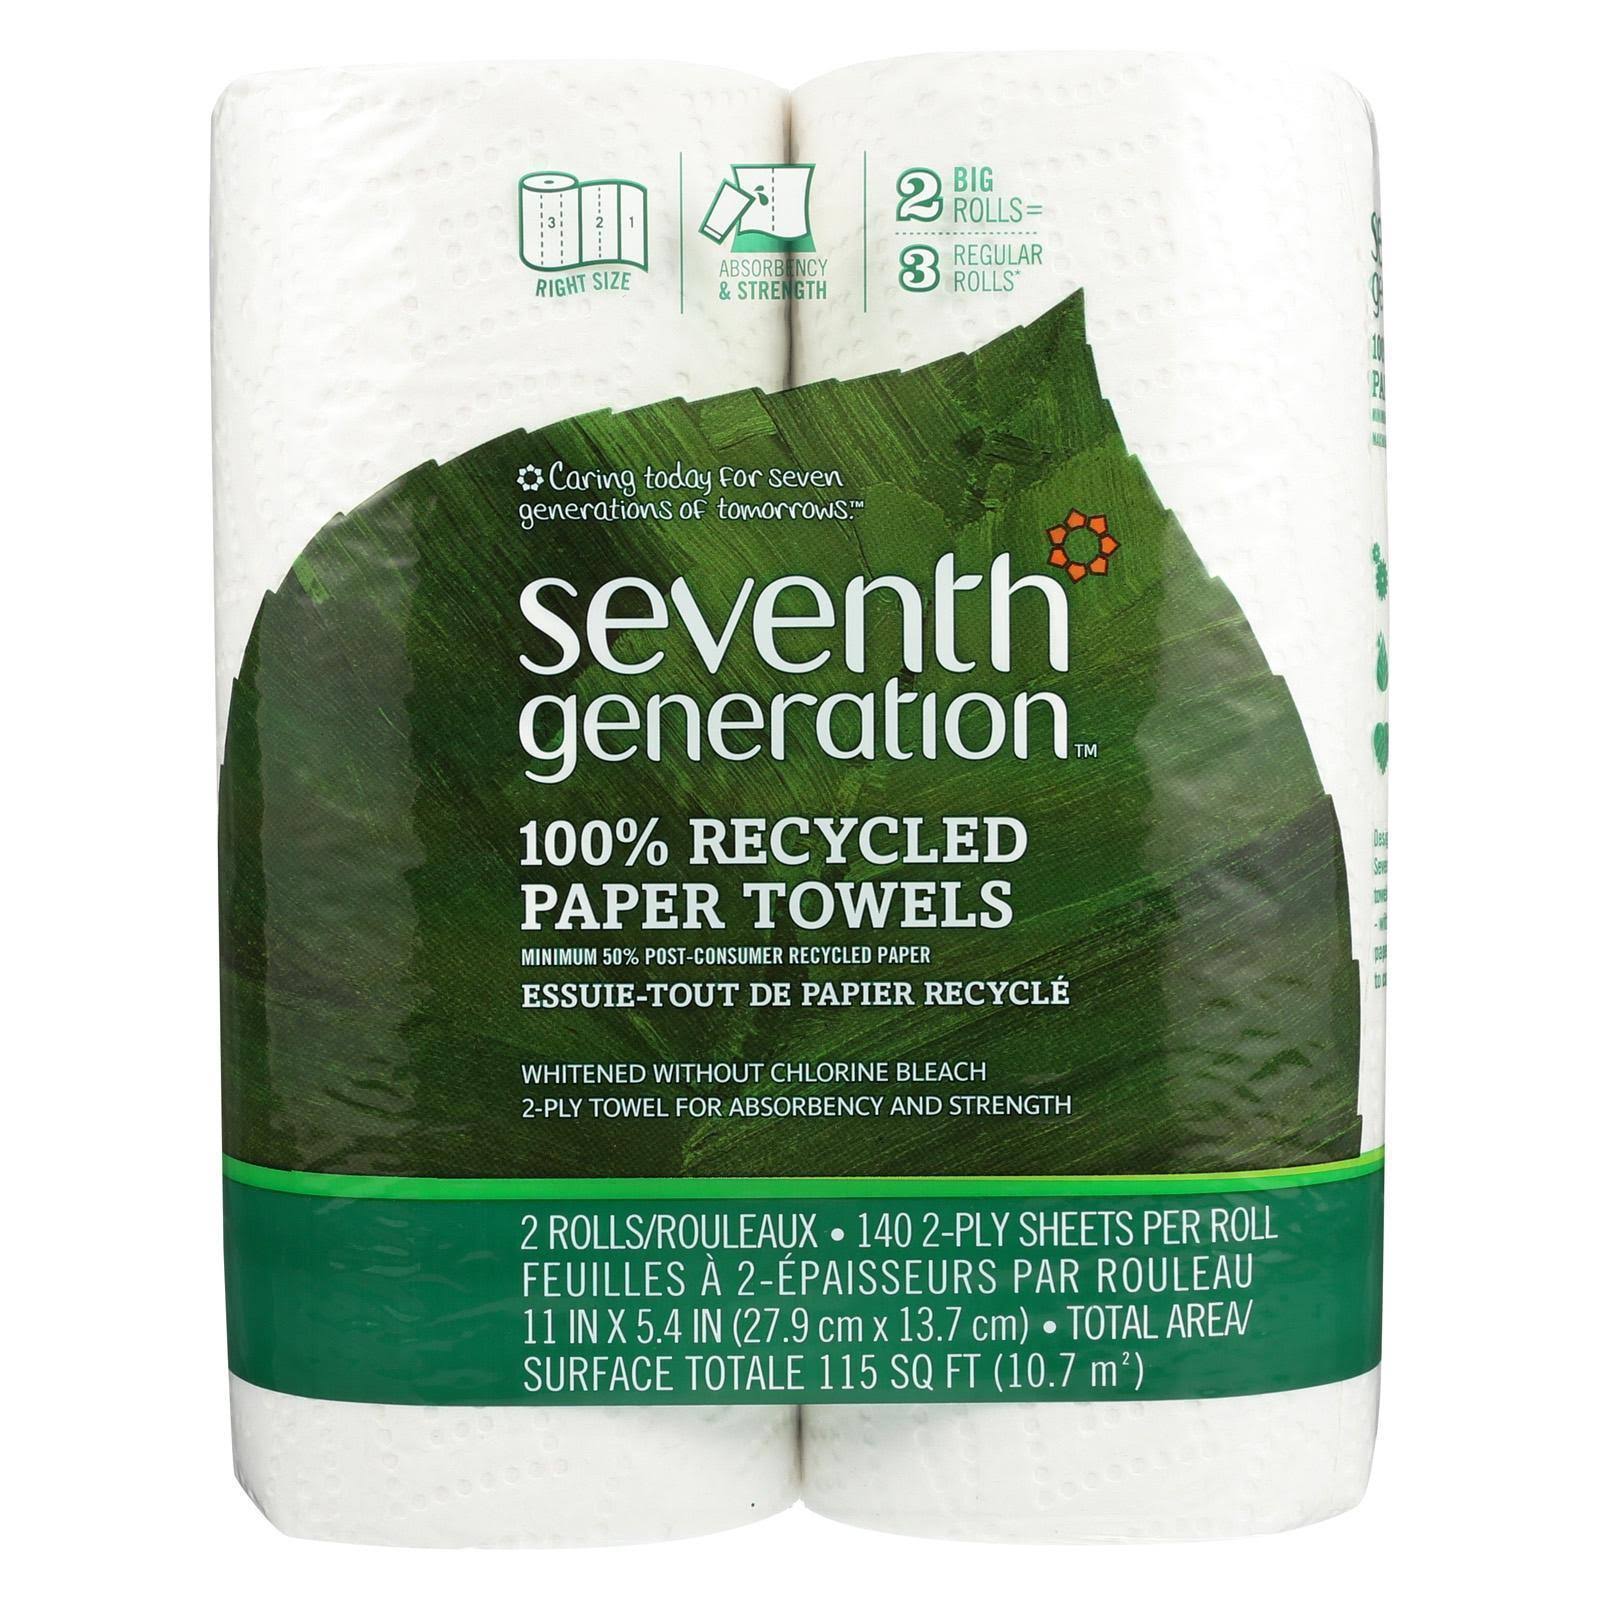 Seventh Generation 100% Recycled Paper Towels - White, 2 Rolls